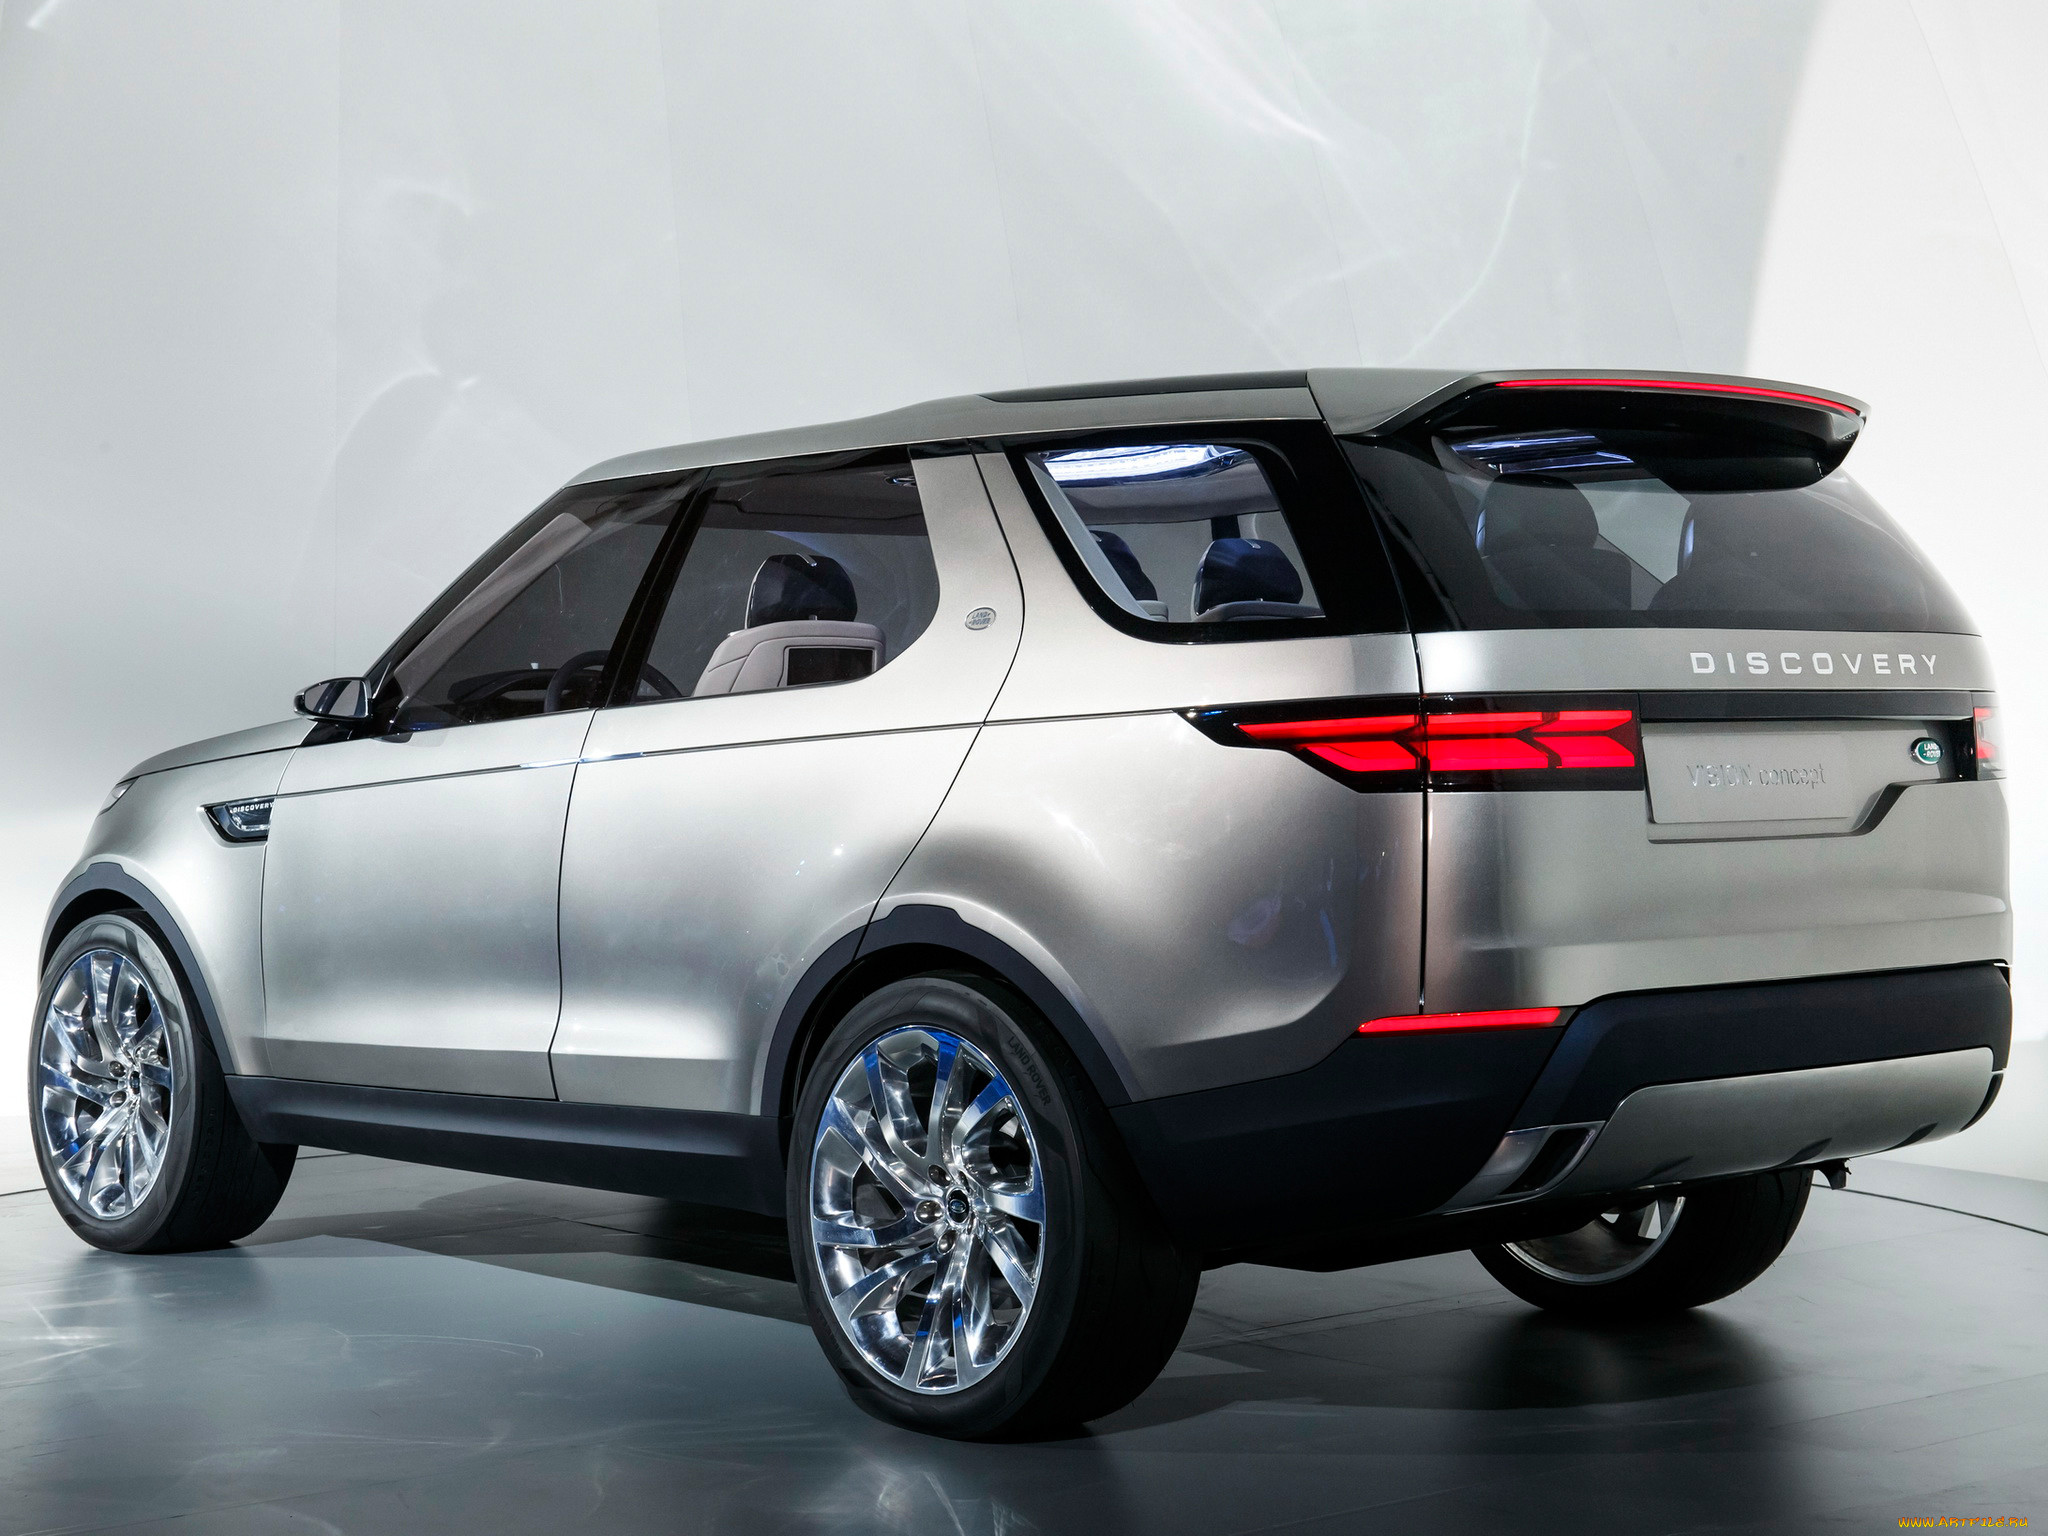 , land-rover, land, rover, discovery, vision, , 2014, concept